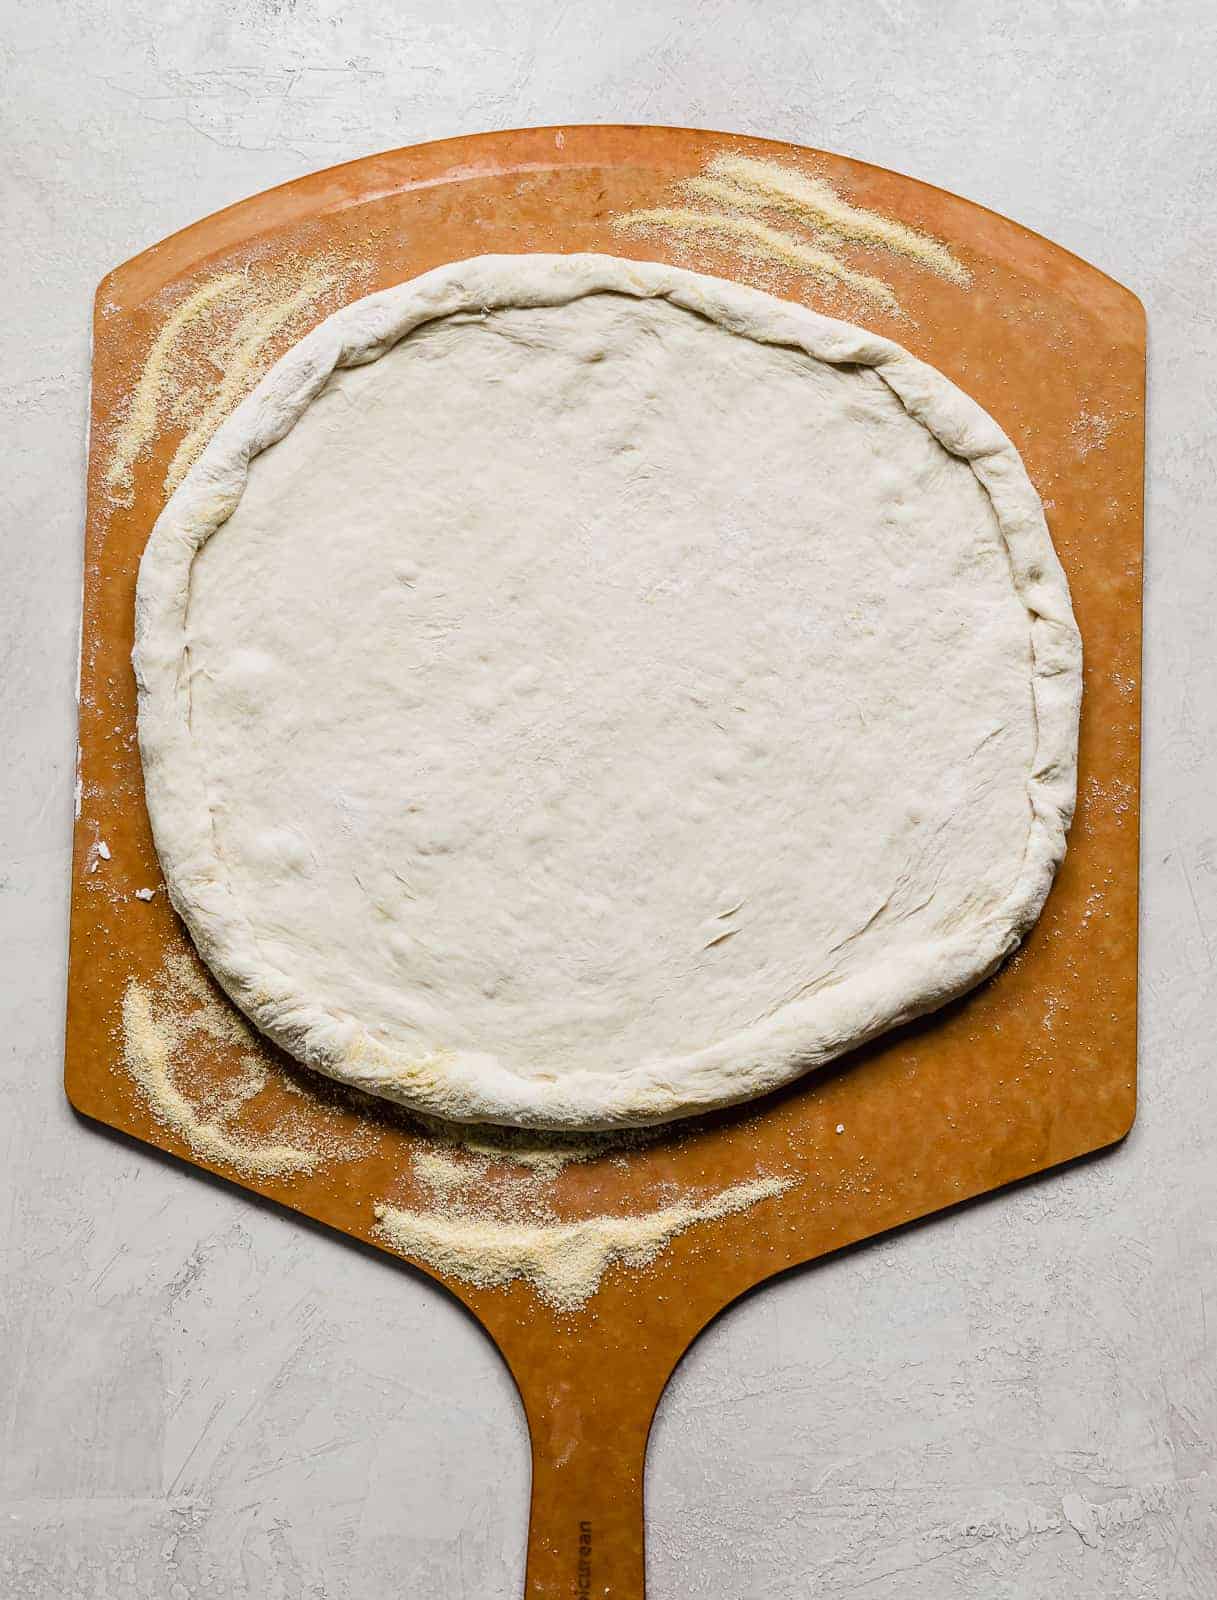 A pizza peel with a round pizza dough spread on it.